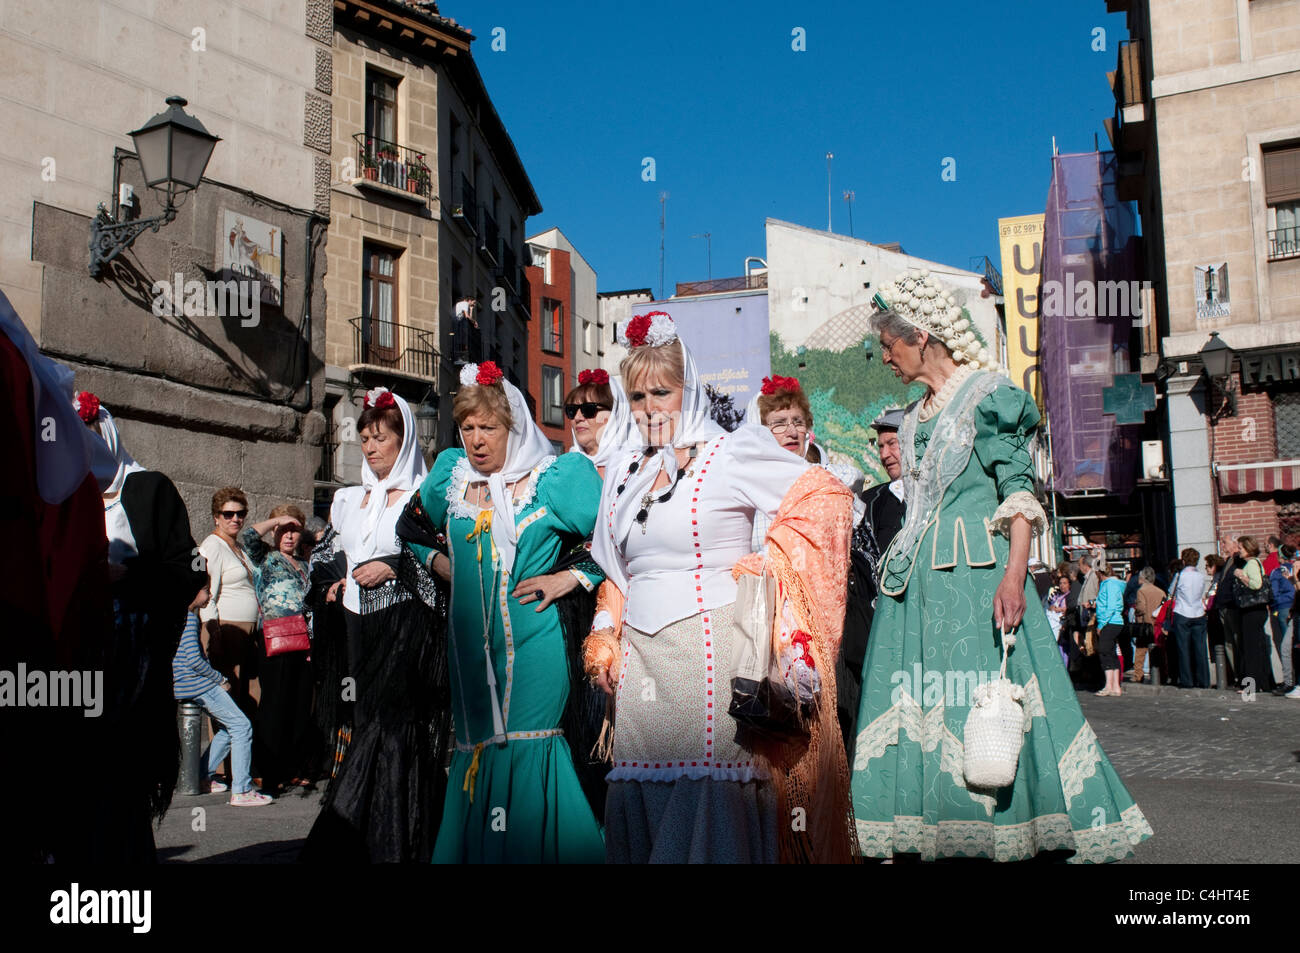 People dressed in traditional clothes during religious procession for Festival of San Isidro, Madrid, Spain Stock Photo